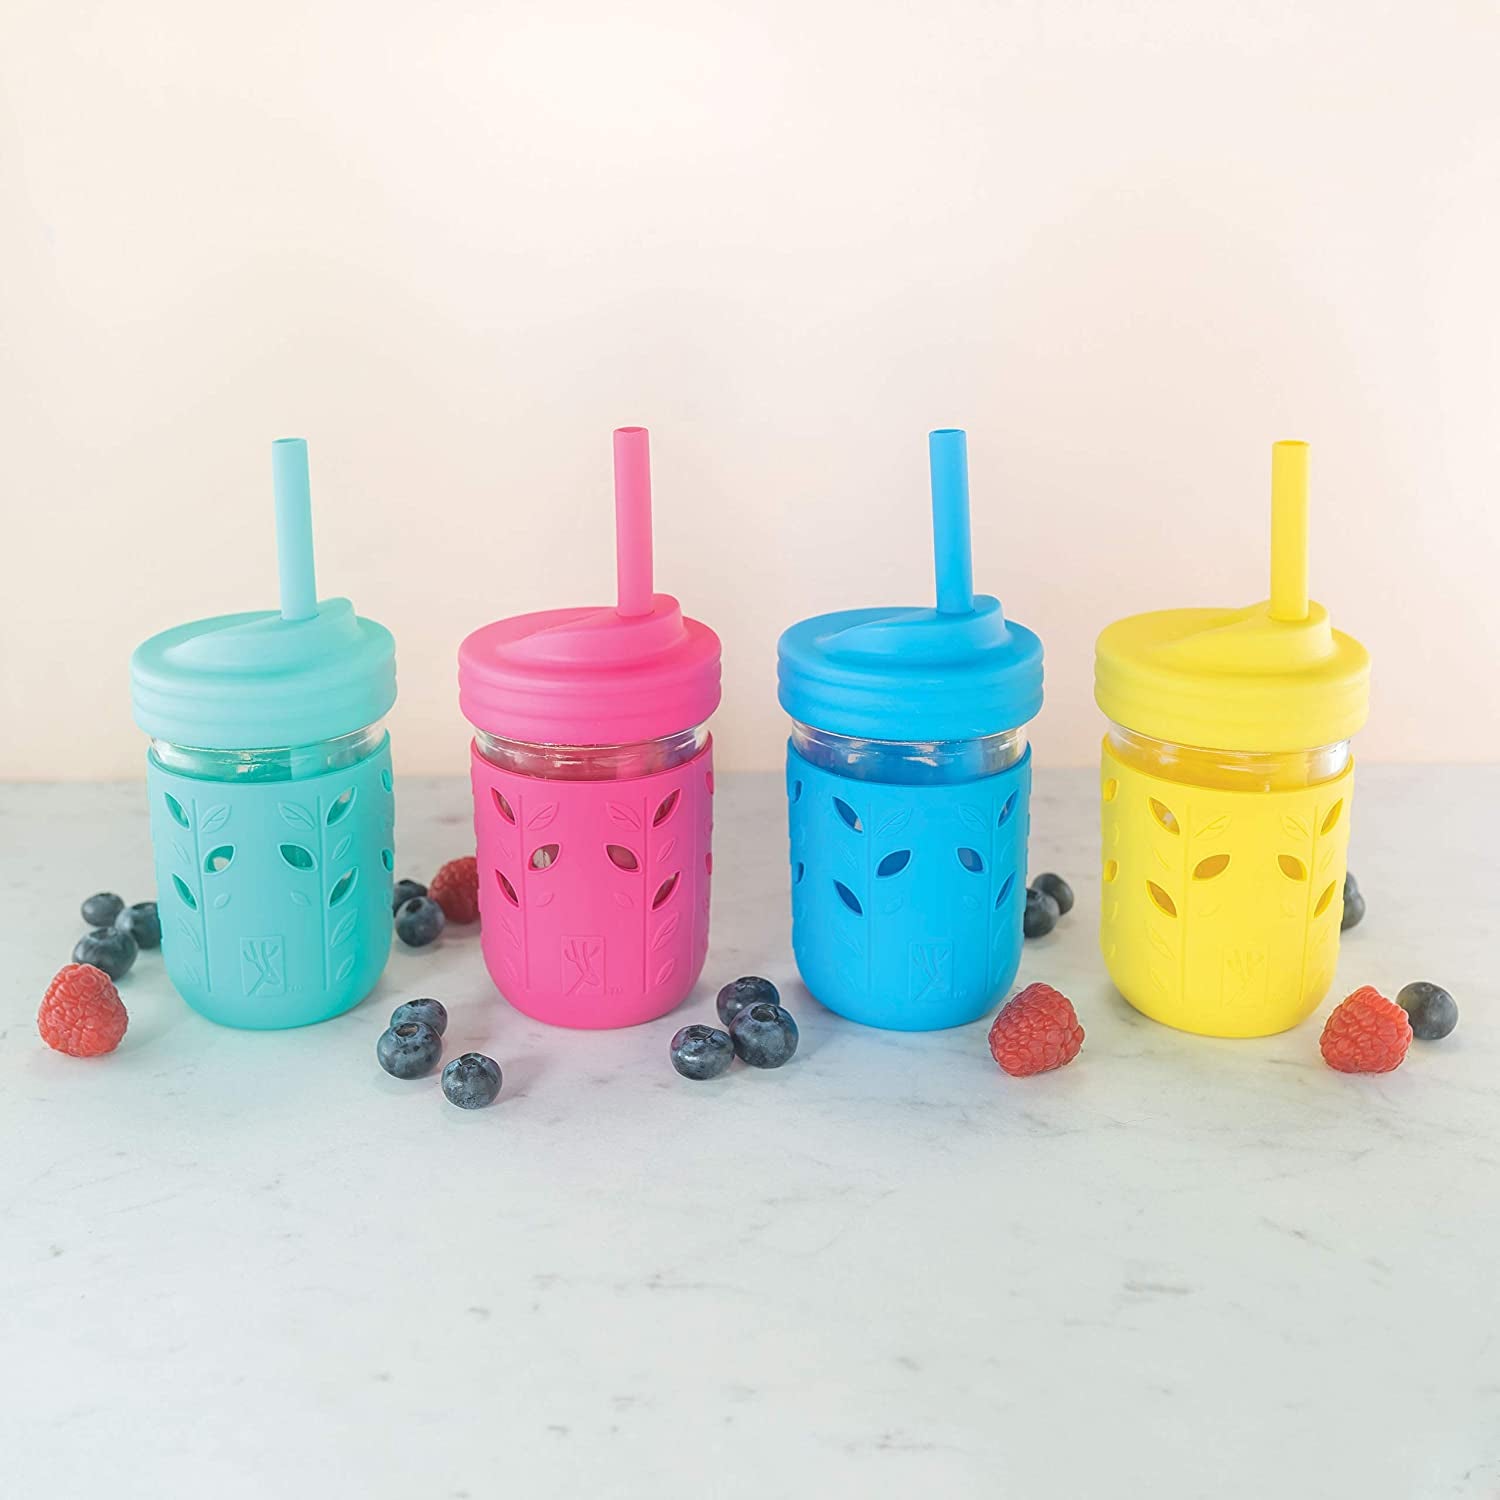 Kids & Toddler Cups | the Original Glass Mason Jars 8 Oz with Silicone Sleeves & Silicone Straws with Stoppers | Smoothie Cups | Spill Proof Sippy Cups for Toddlers